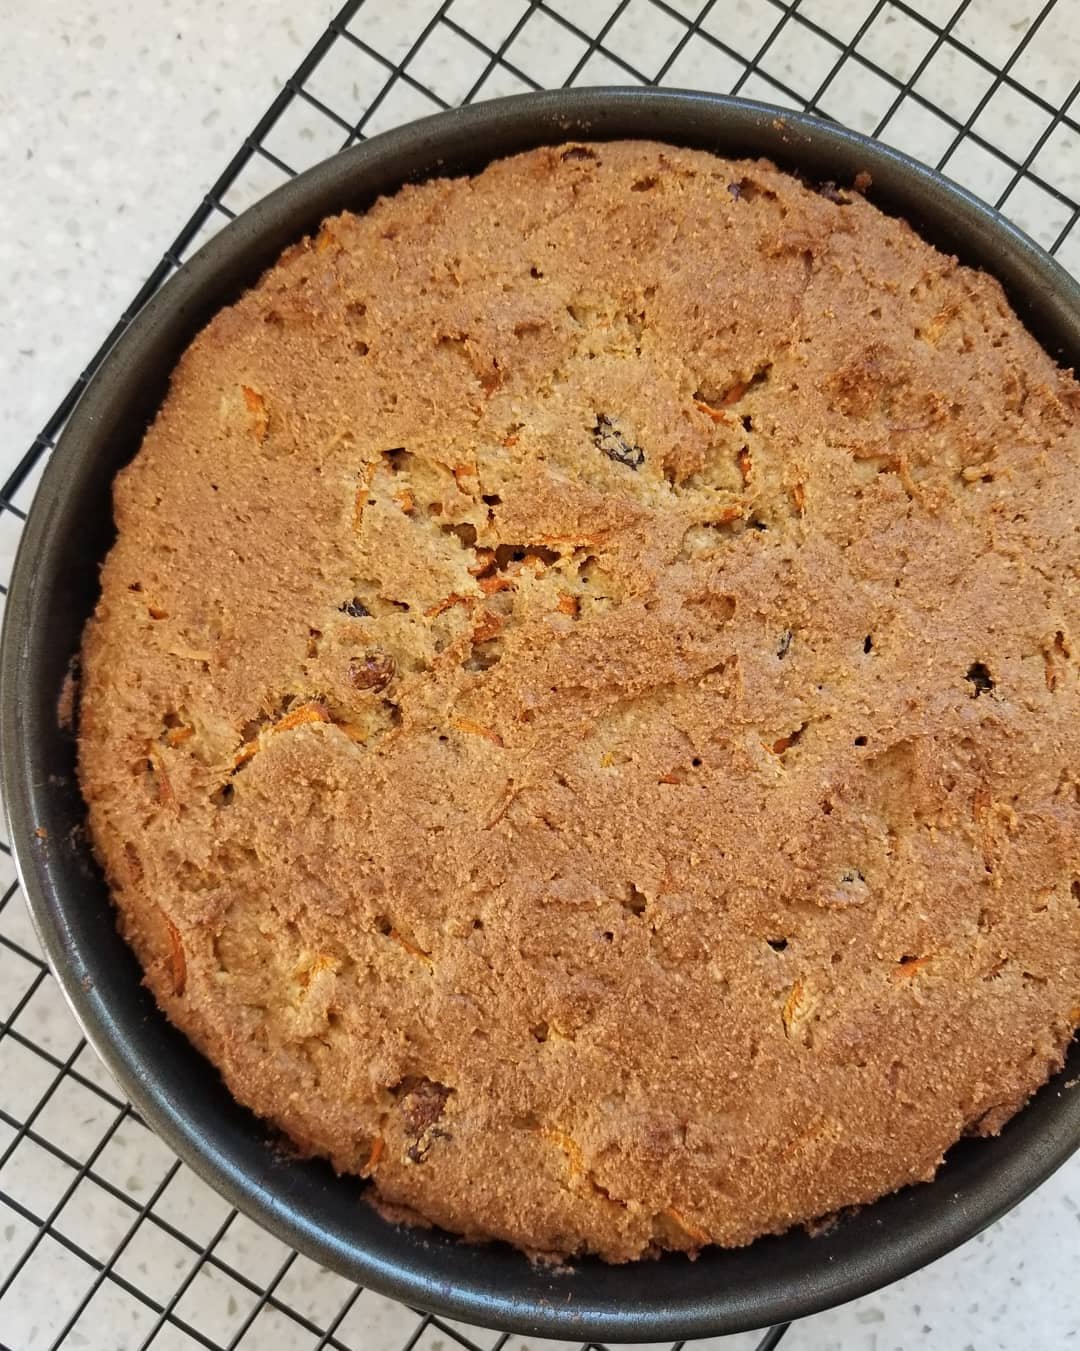 Carrot cake after baking